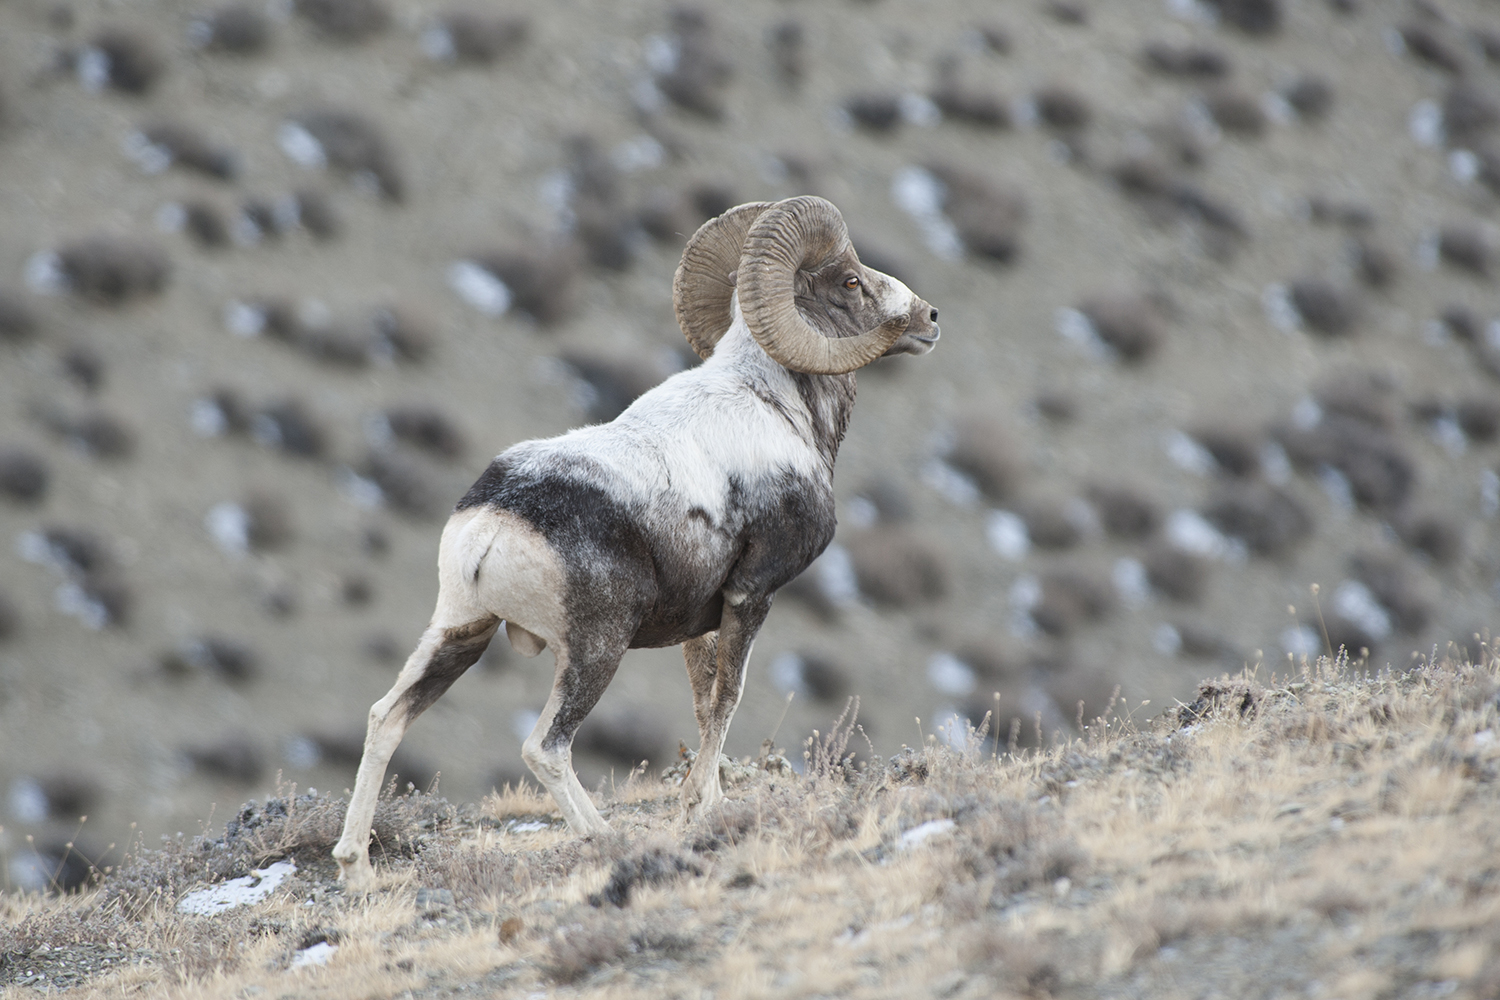 Altai argali, one of the three subspecies of argali sheep in Mongolia, are found in the westernmost part of the country.